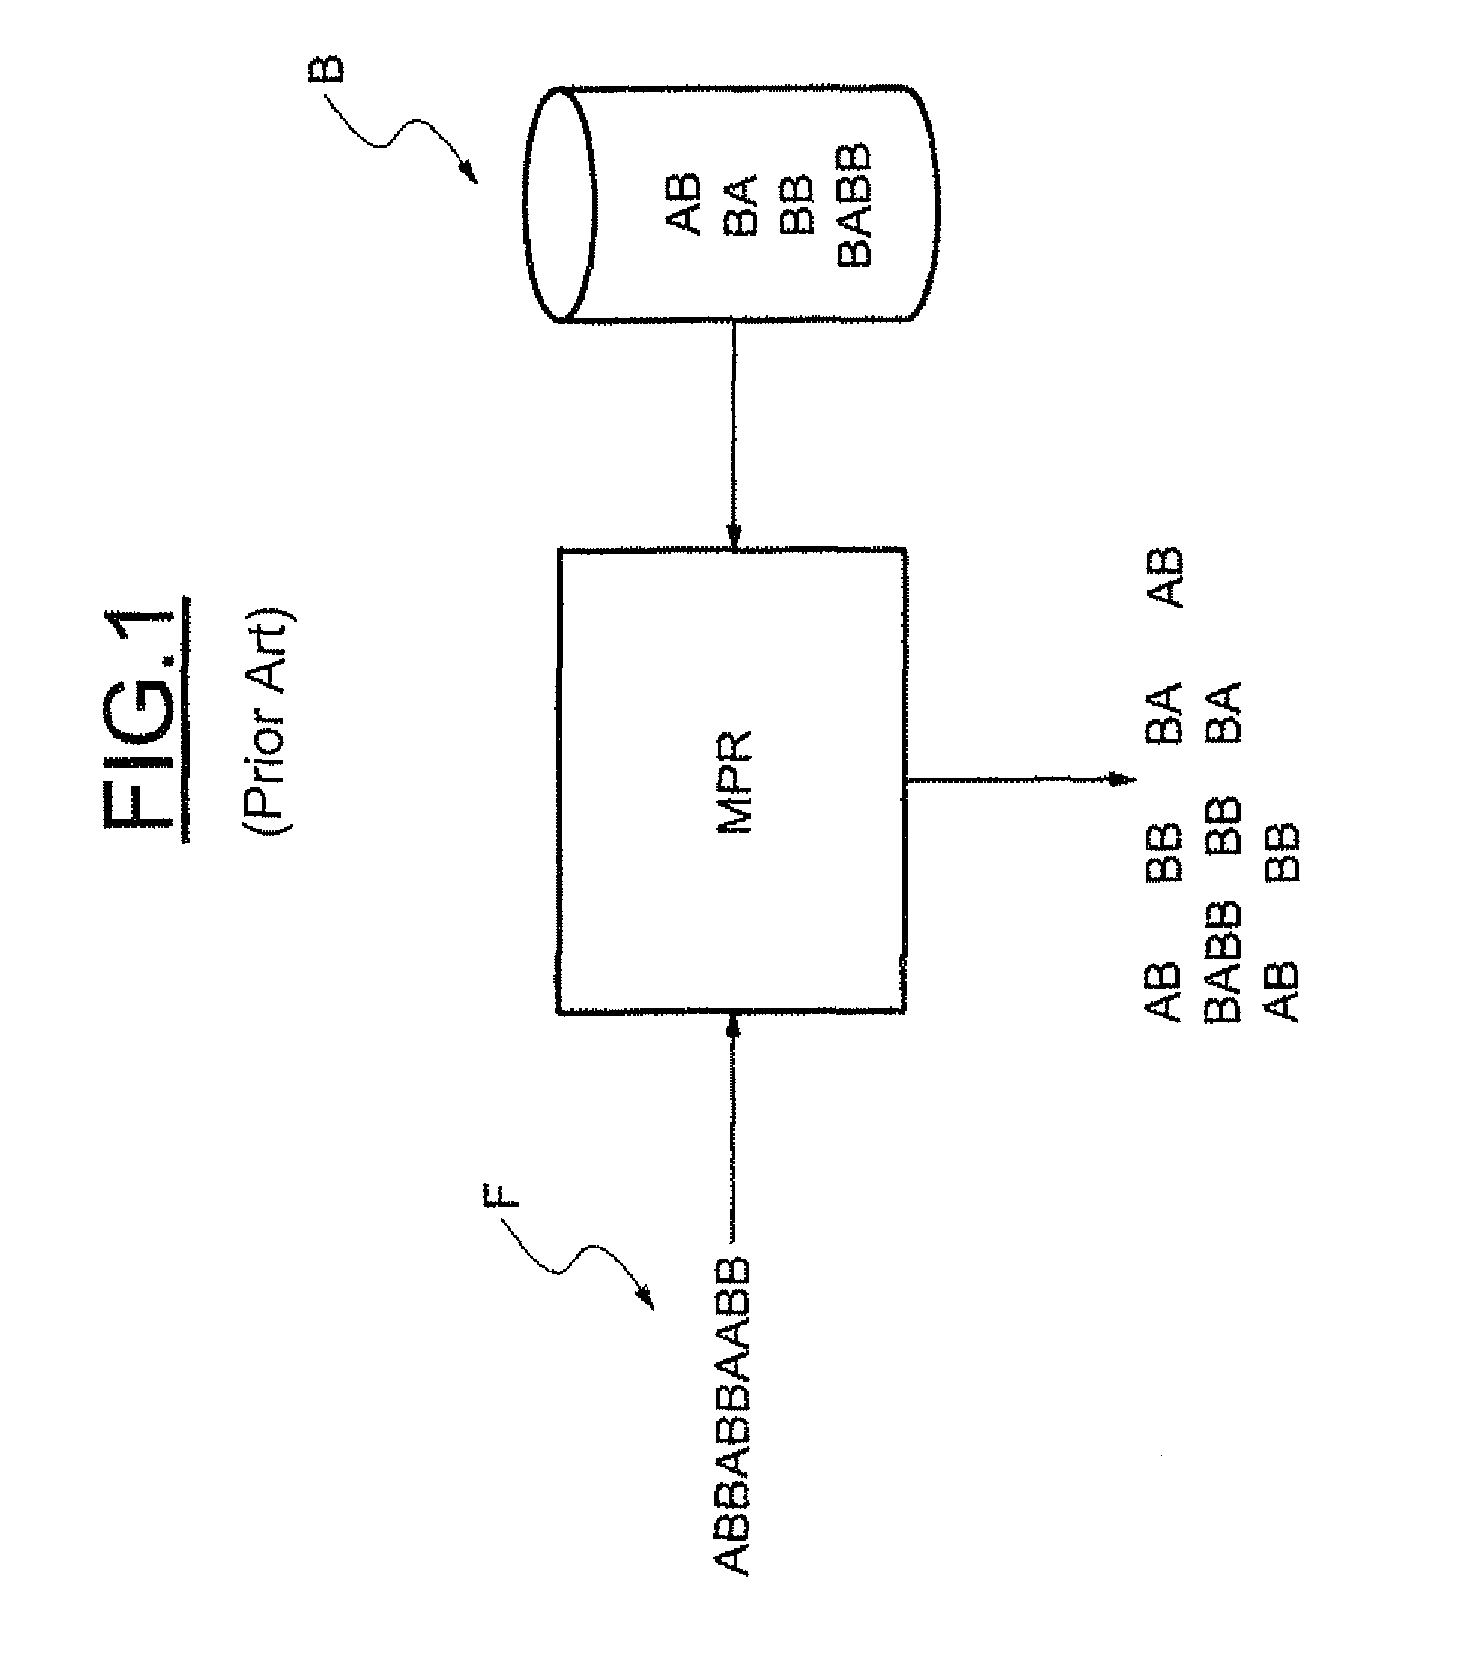 Memory circuit for Aho-corasick type character recognition automaton and method of storing data in such a circuit